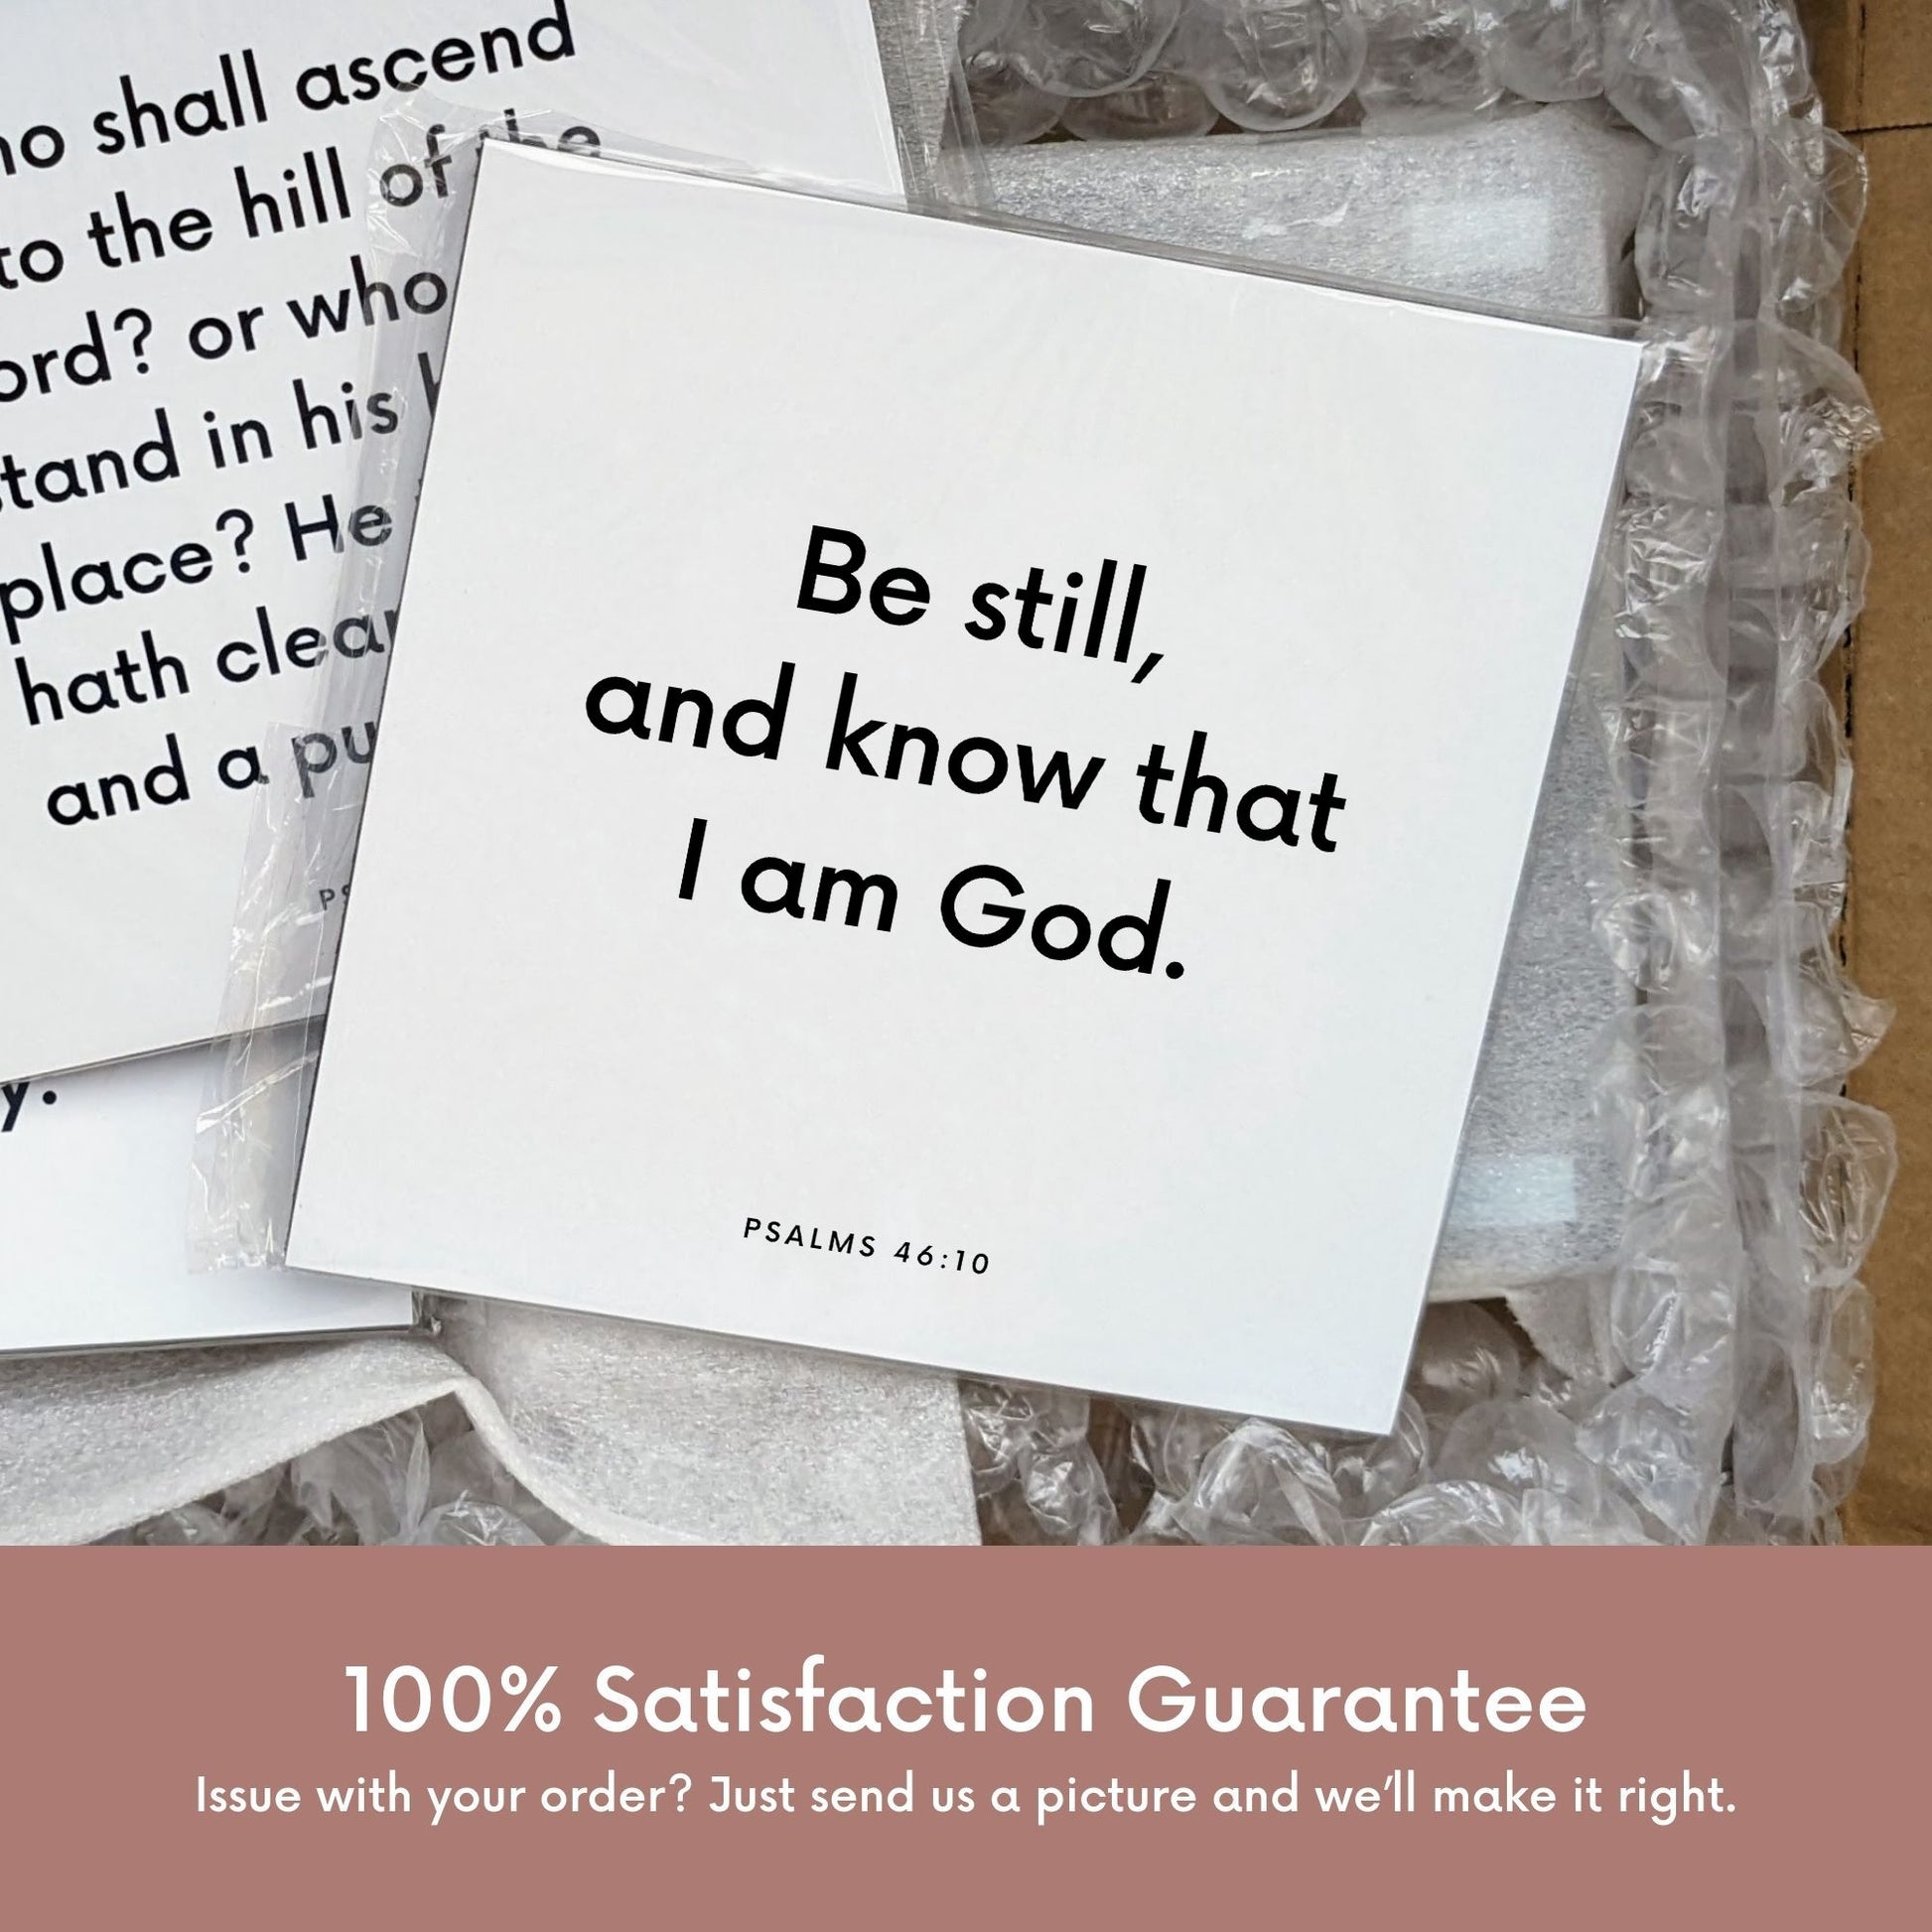 Shipping materials for scripture tile of Psalms 46:10 - "Be still, and know that I am God"